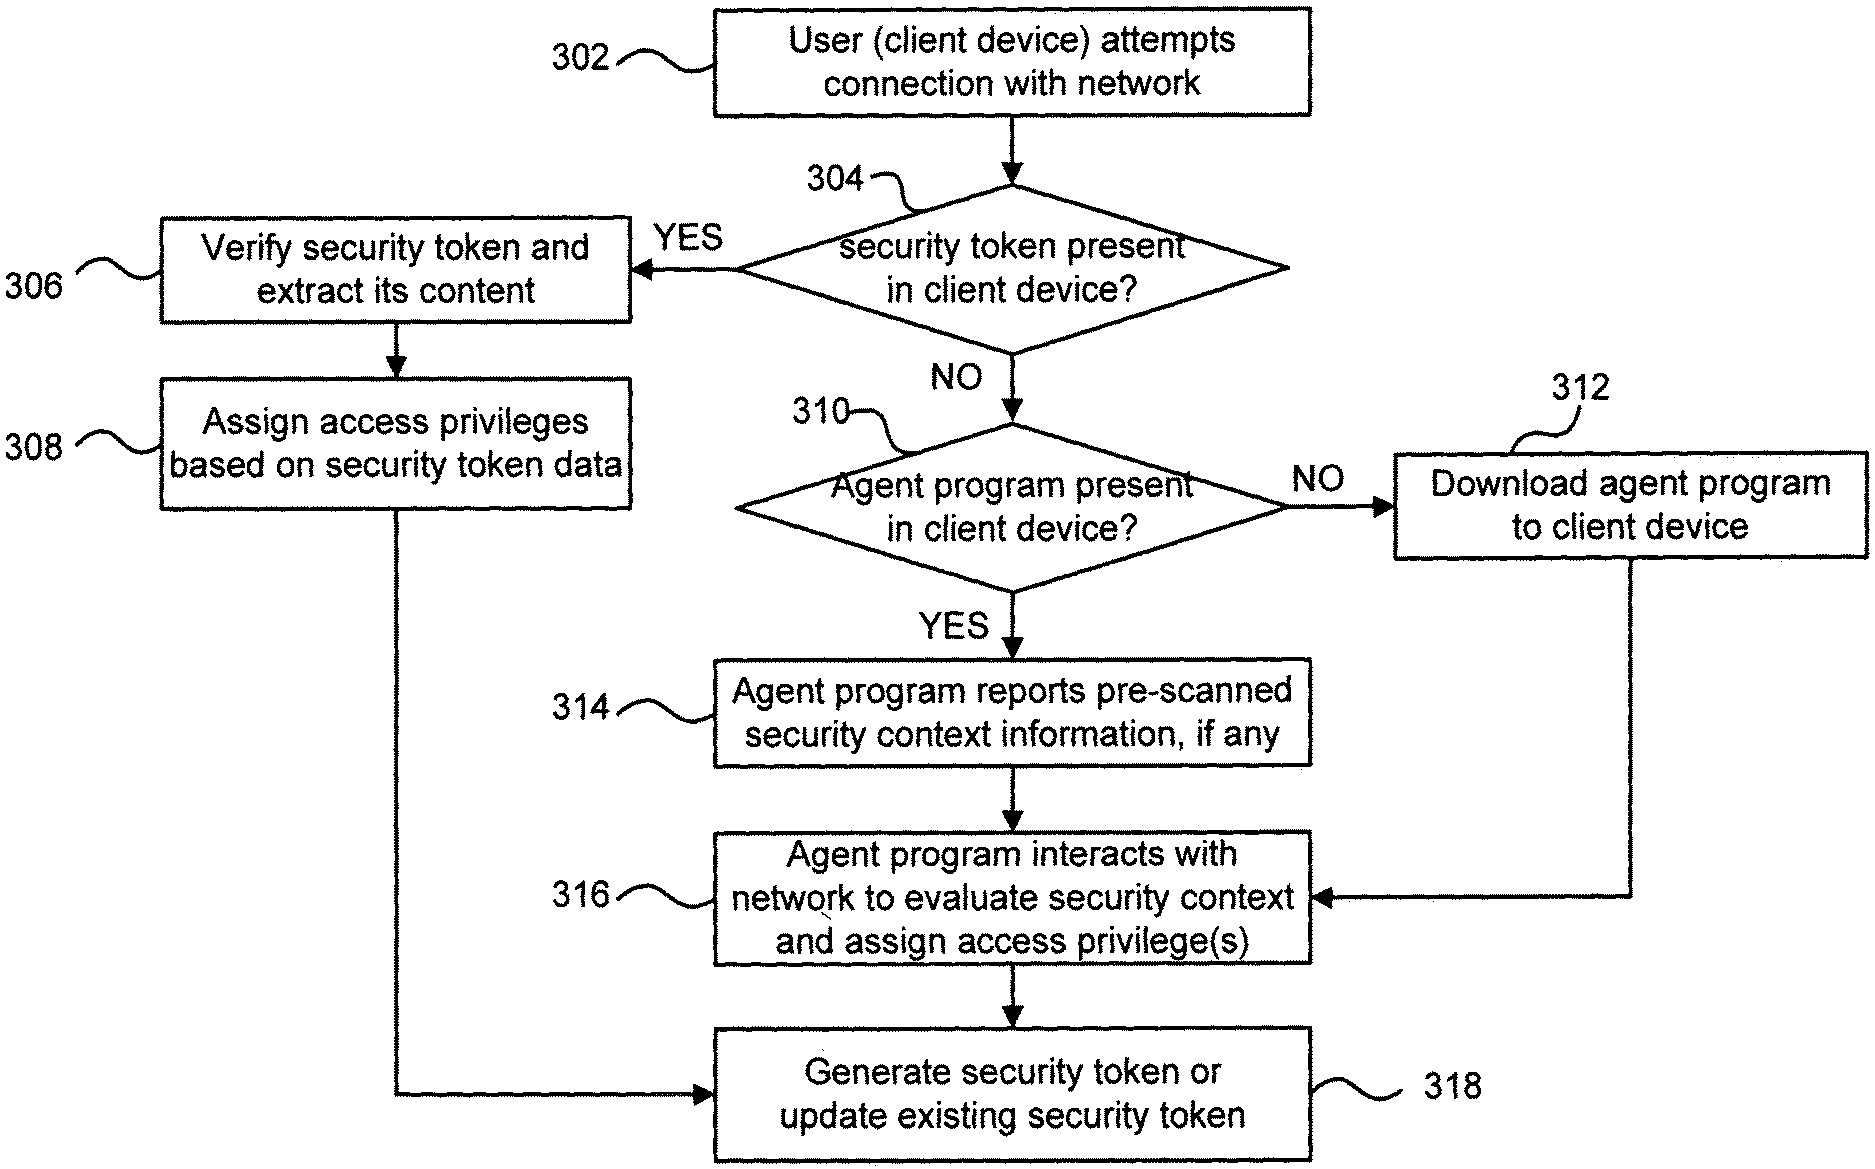 10764264 Evaluating a security context associated with the requested connection